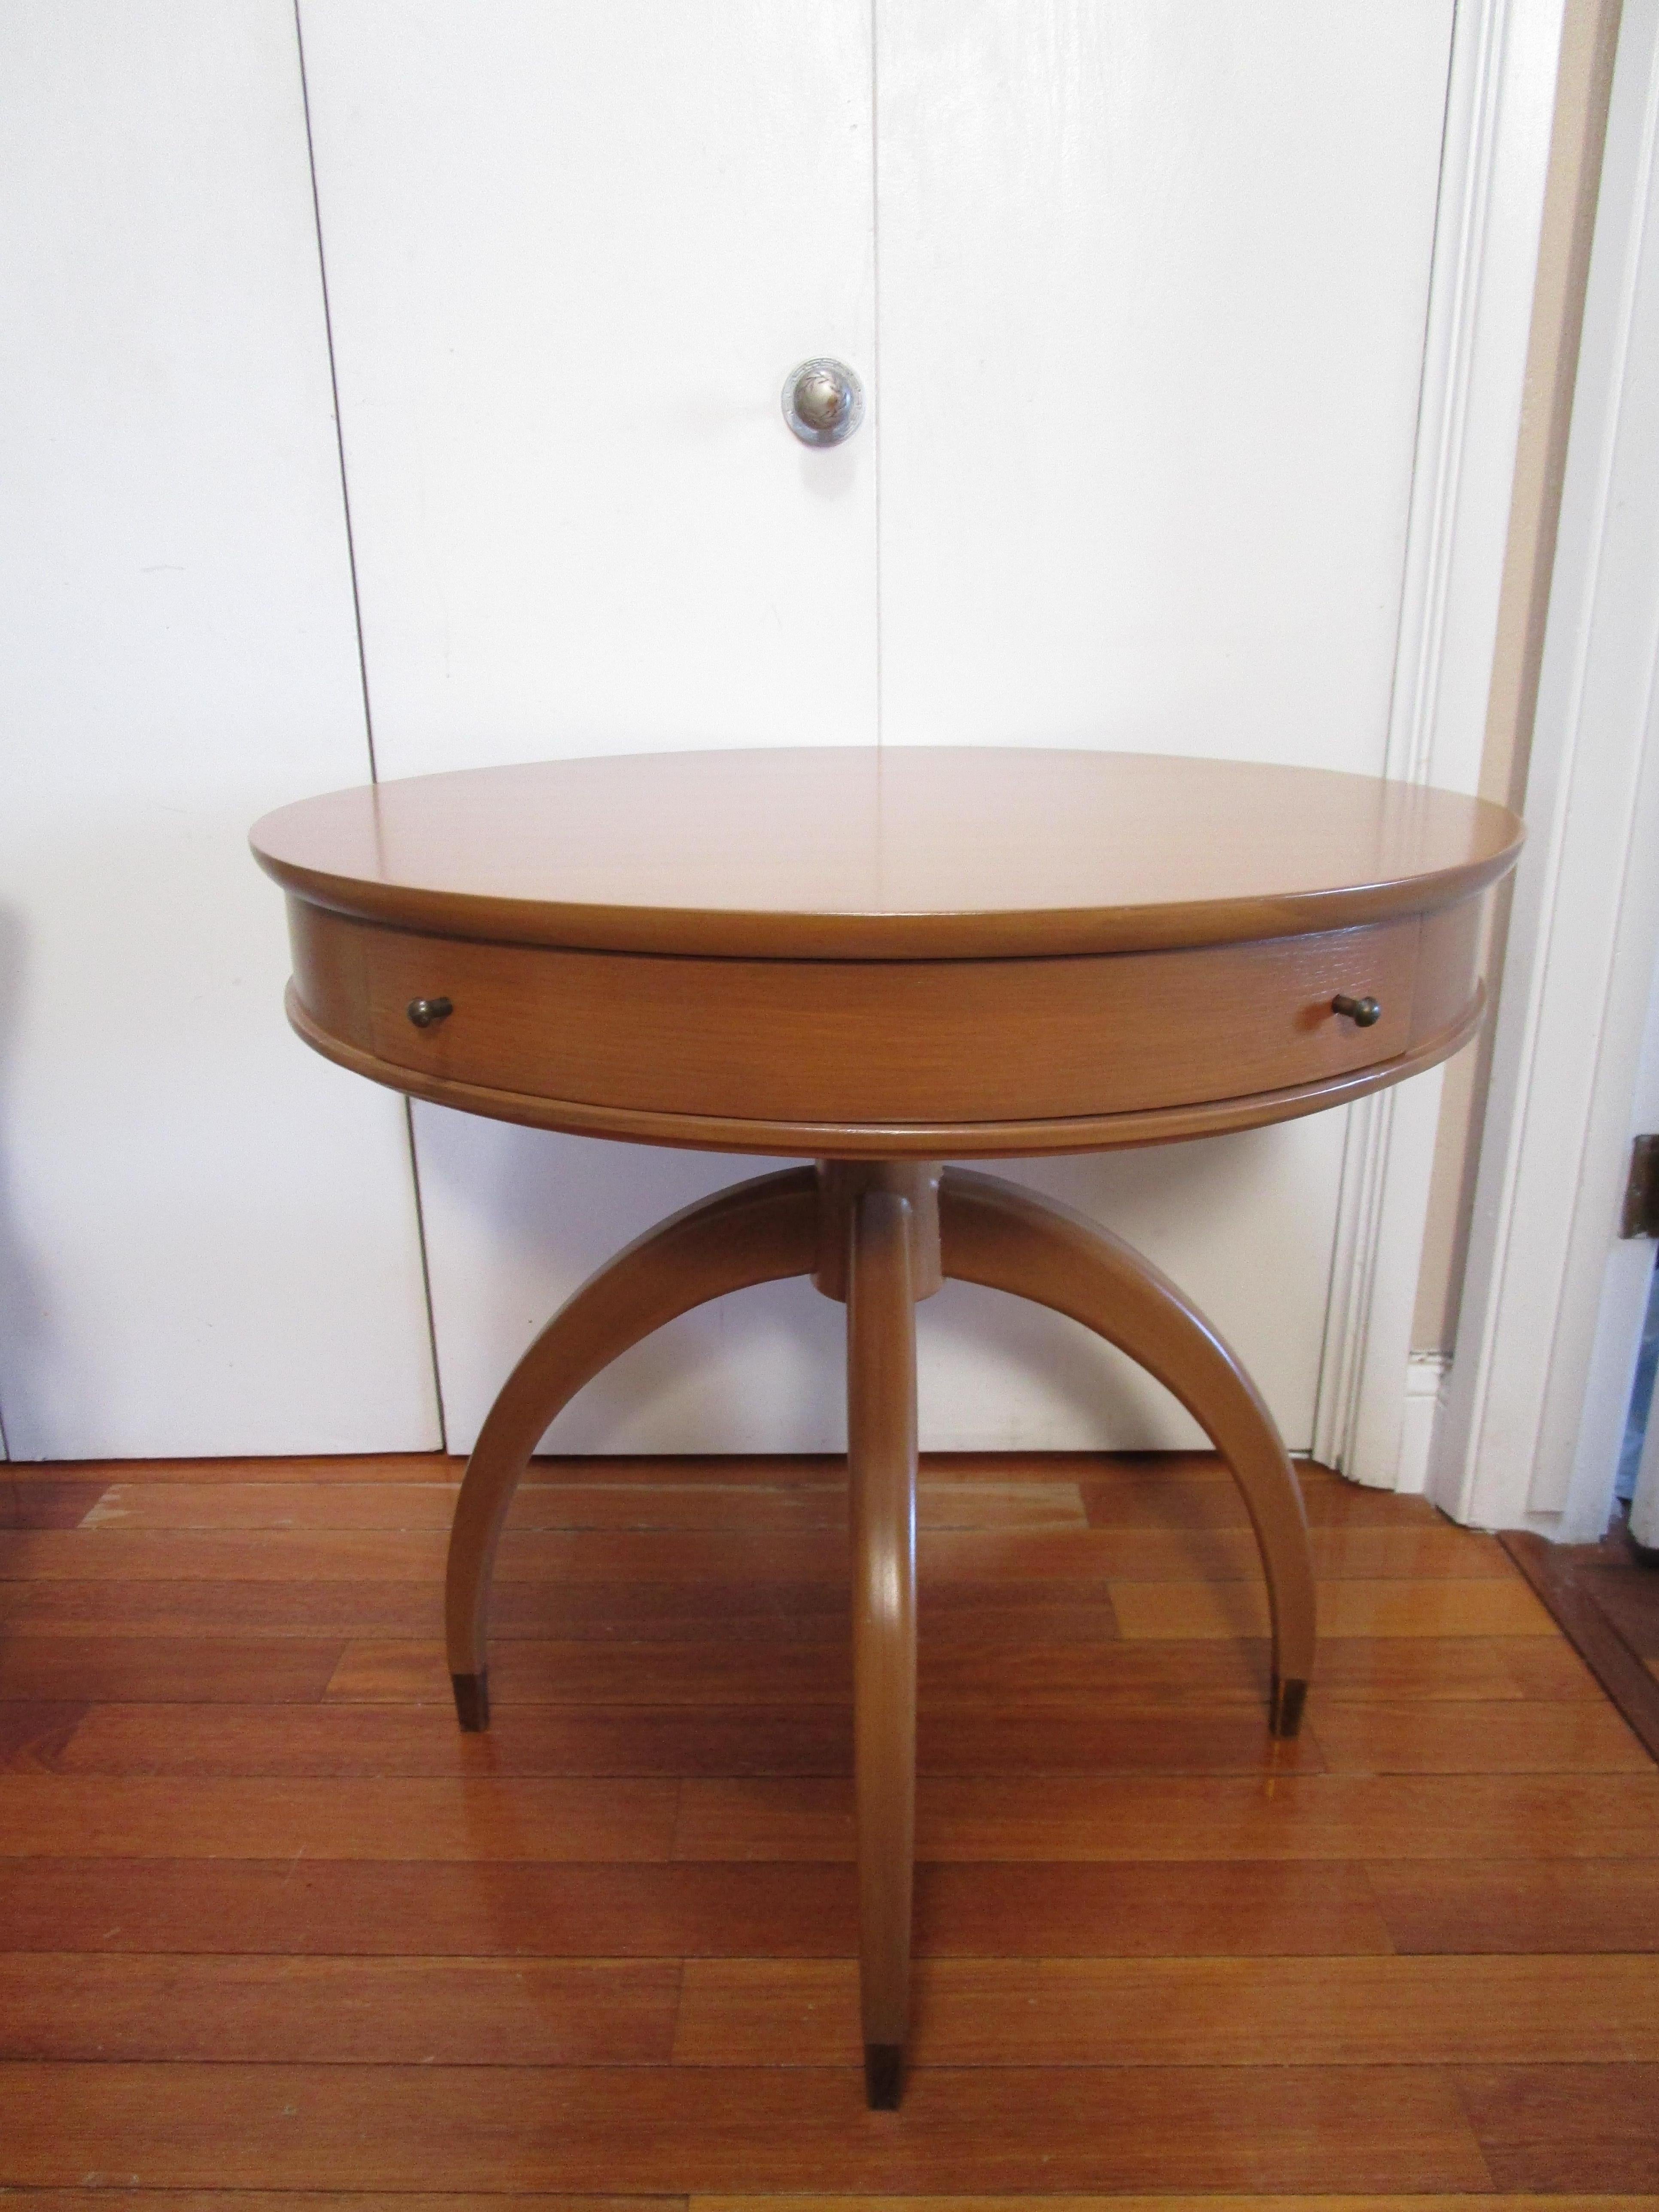 Vintage Mid-Century Modern Danish Style Circular Writing Table with Drawer In Good Condition For Sale In Lomita, CA